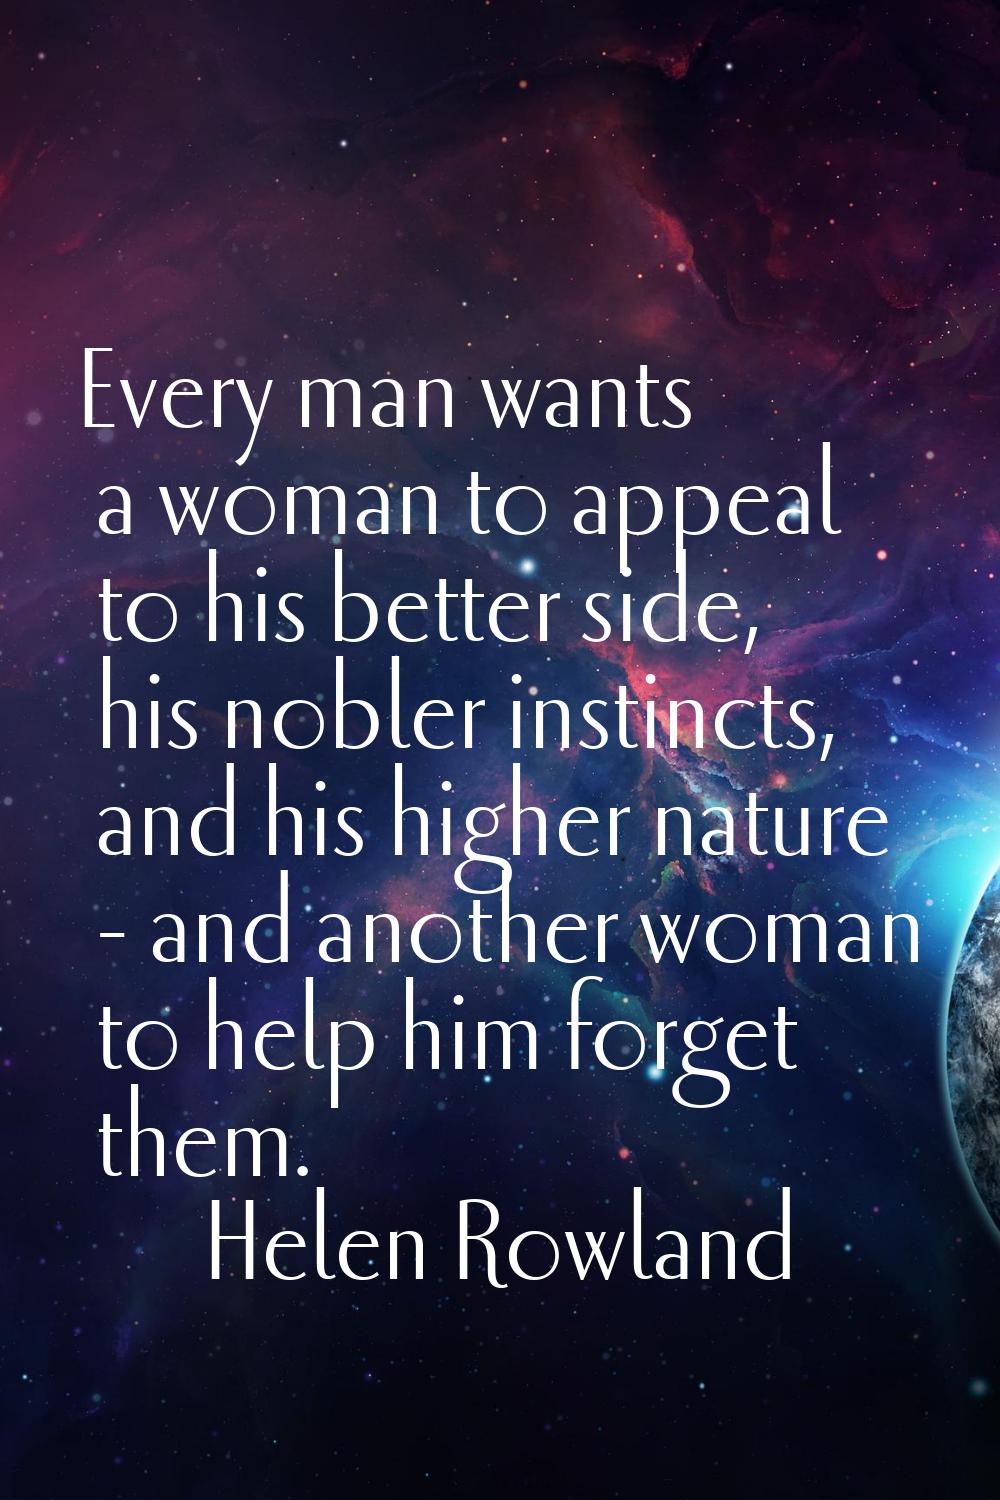 Every man wants a woman to appeal to his better side, his nobler instincts, and his higher nature -